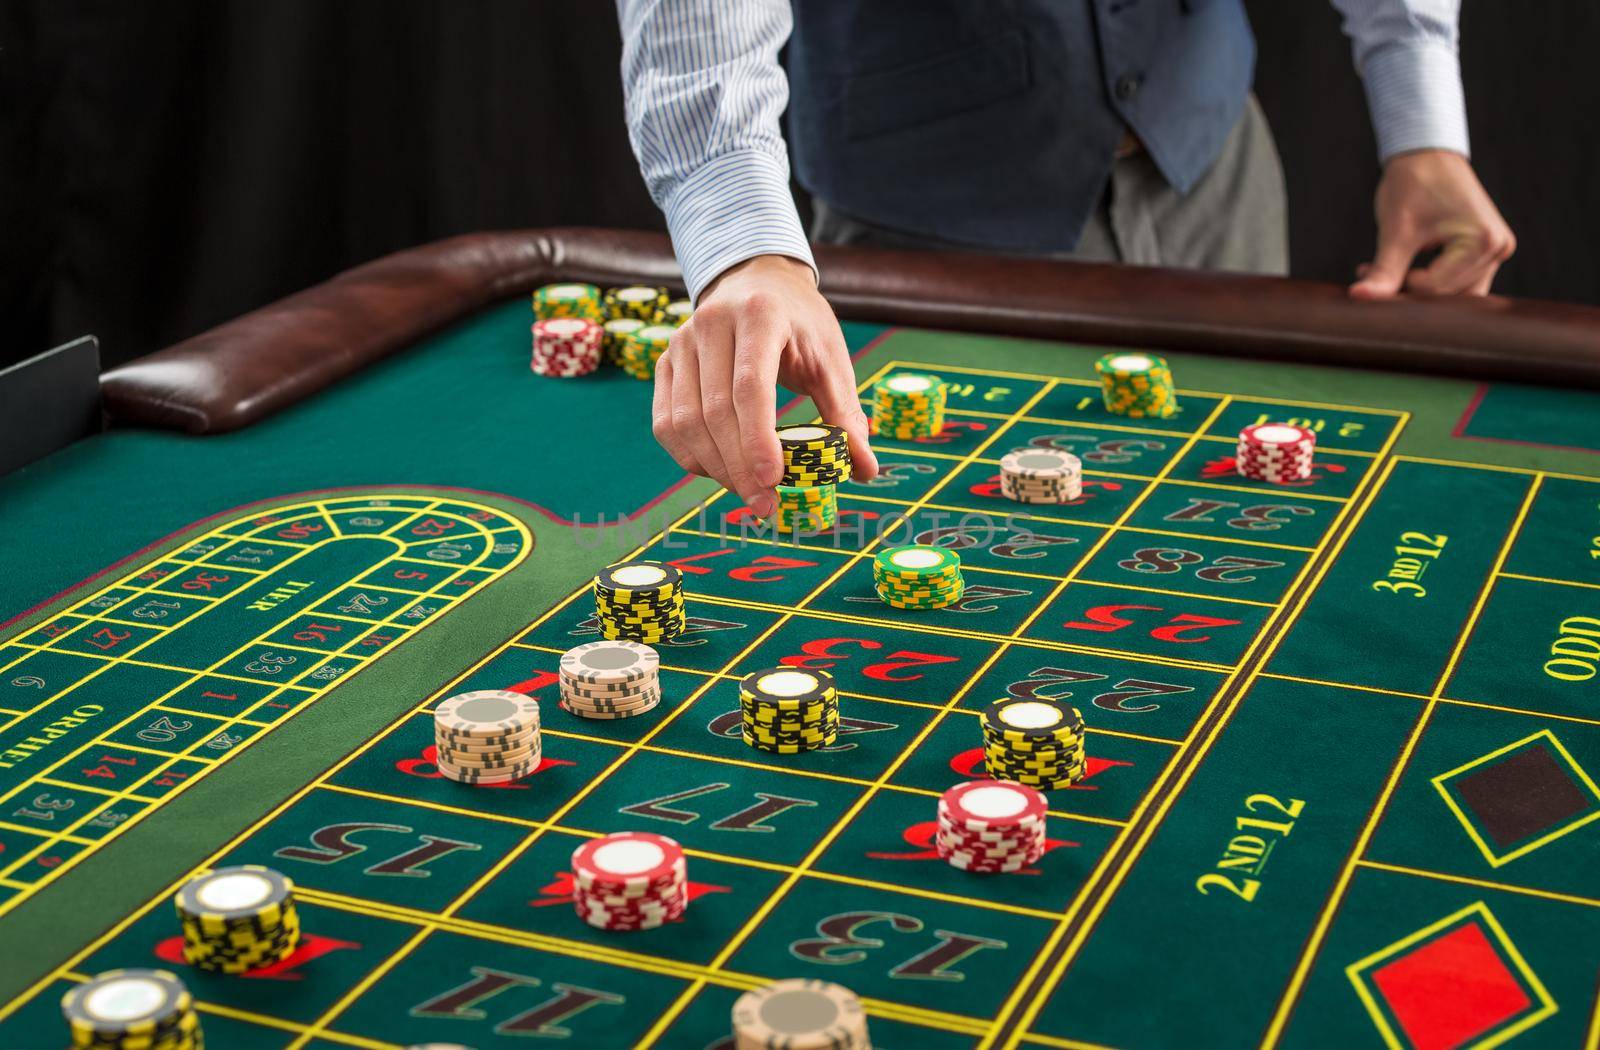 Picture of a green table and betting with chips. Man hand over casino chips on roulette table. Close up